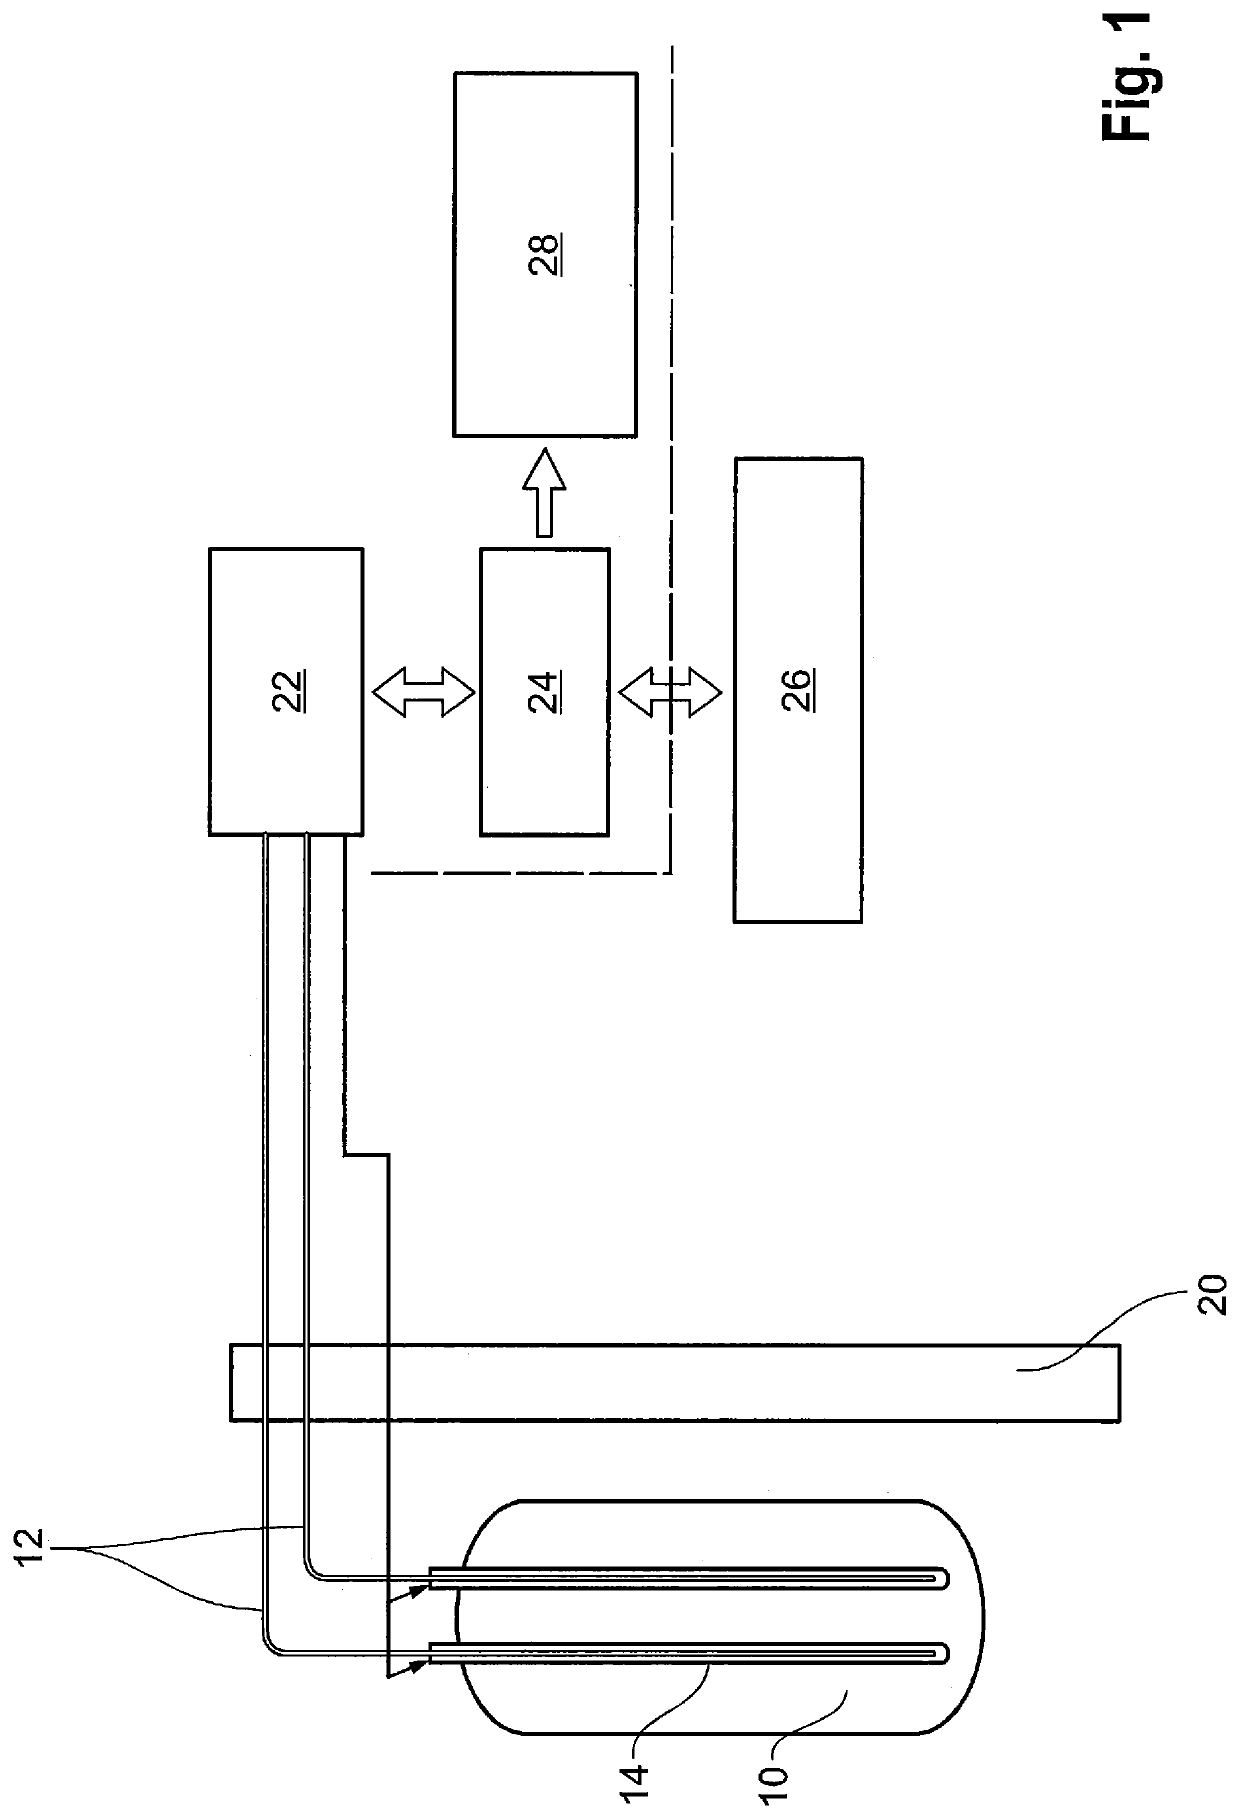 Irradiation target processing system